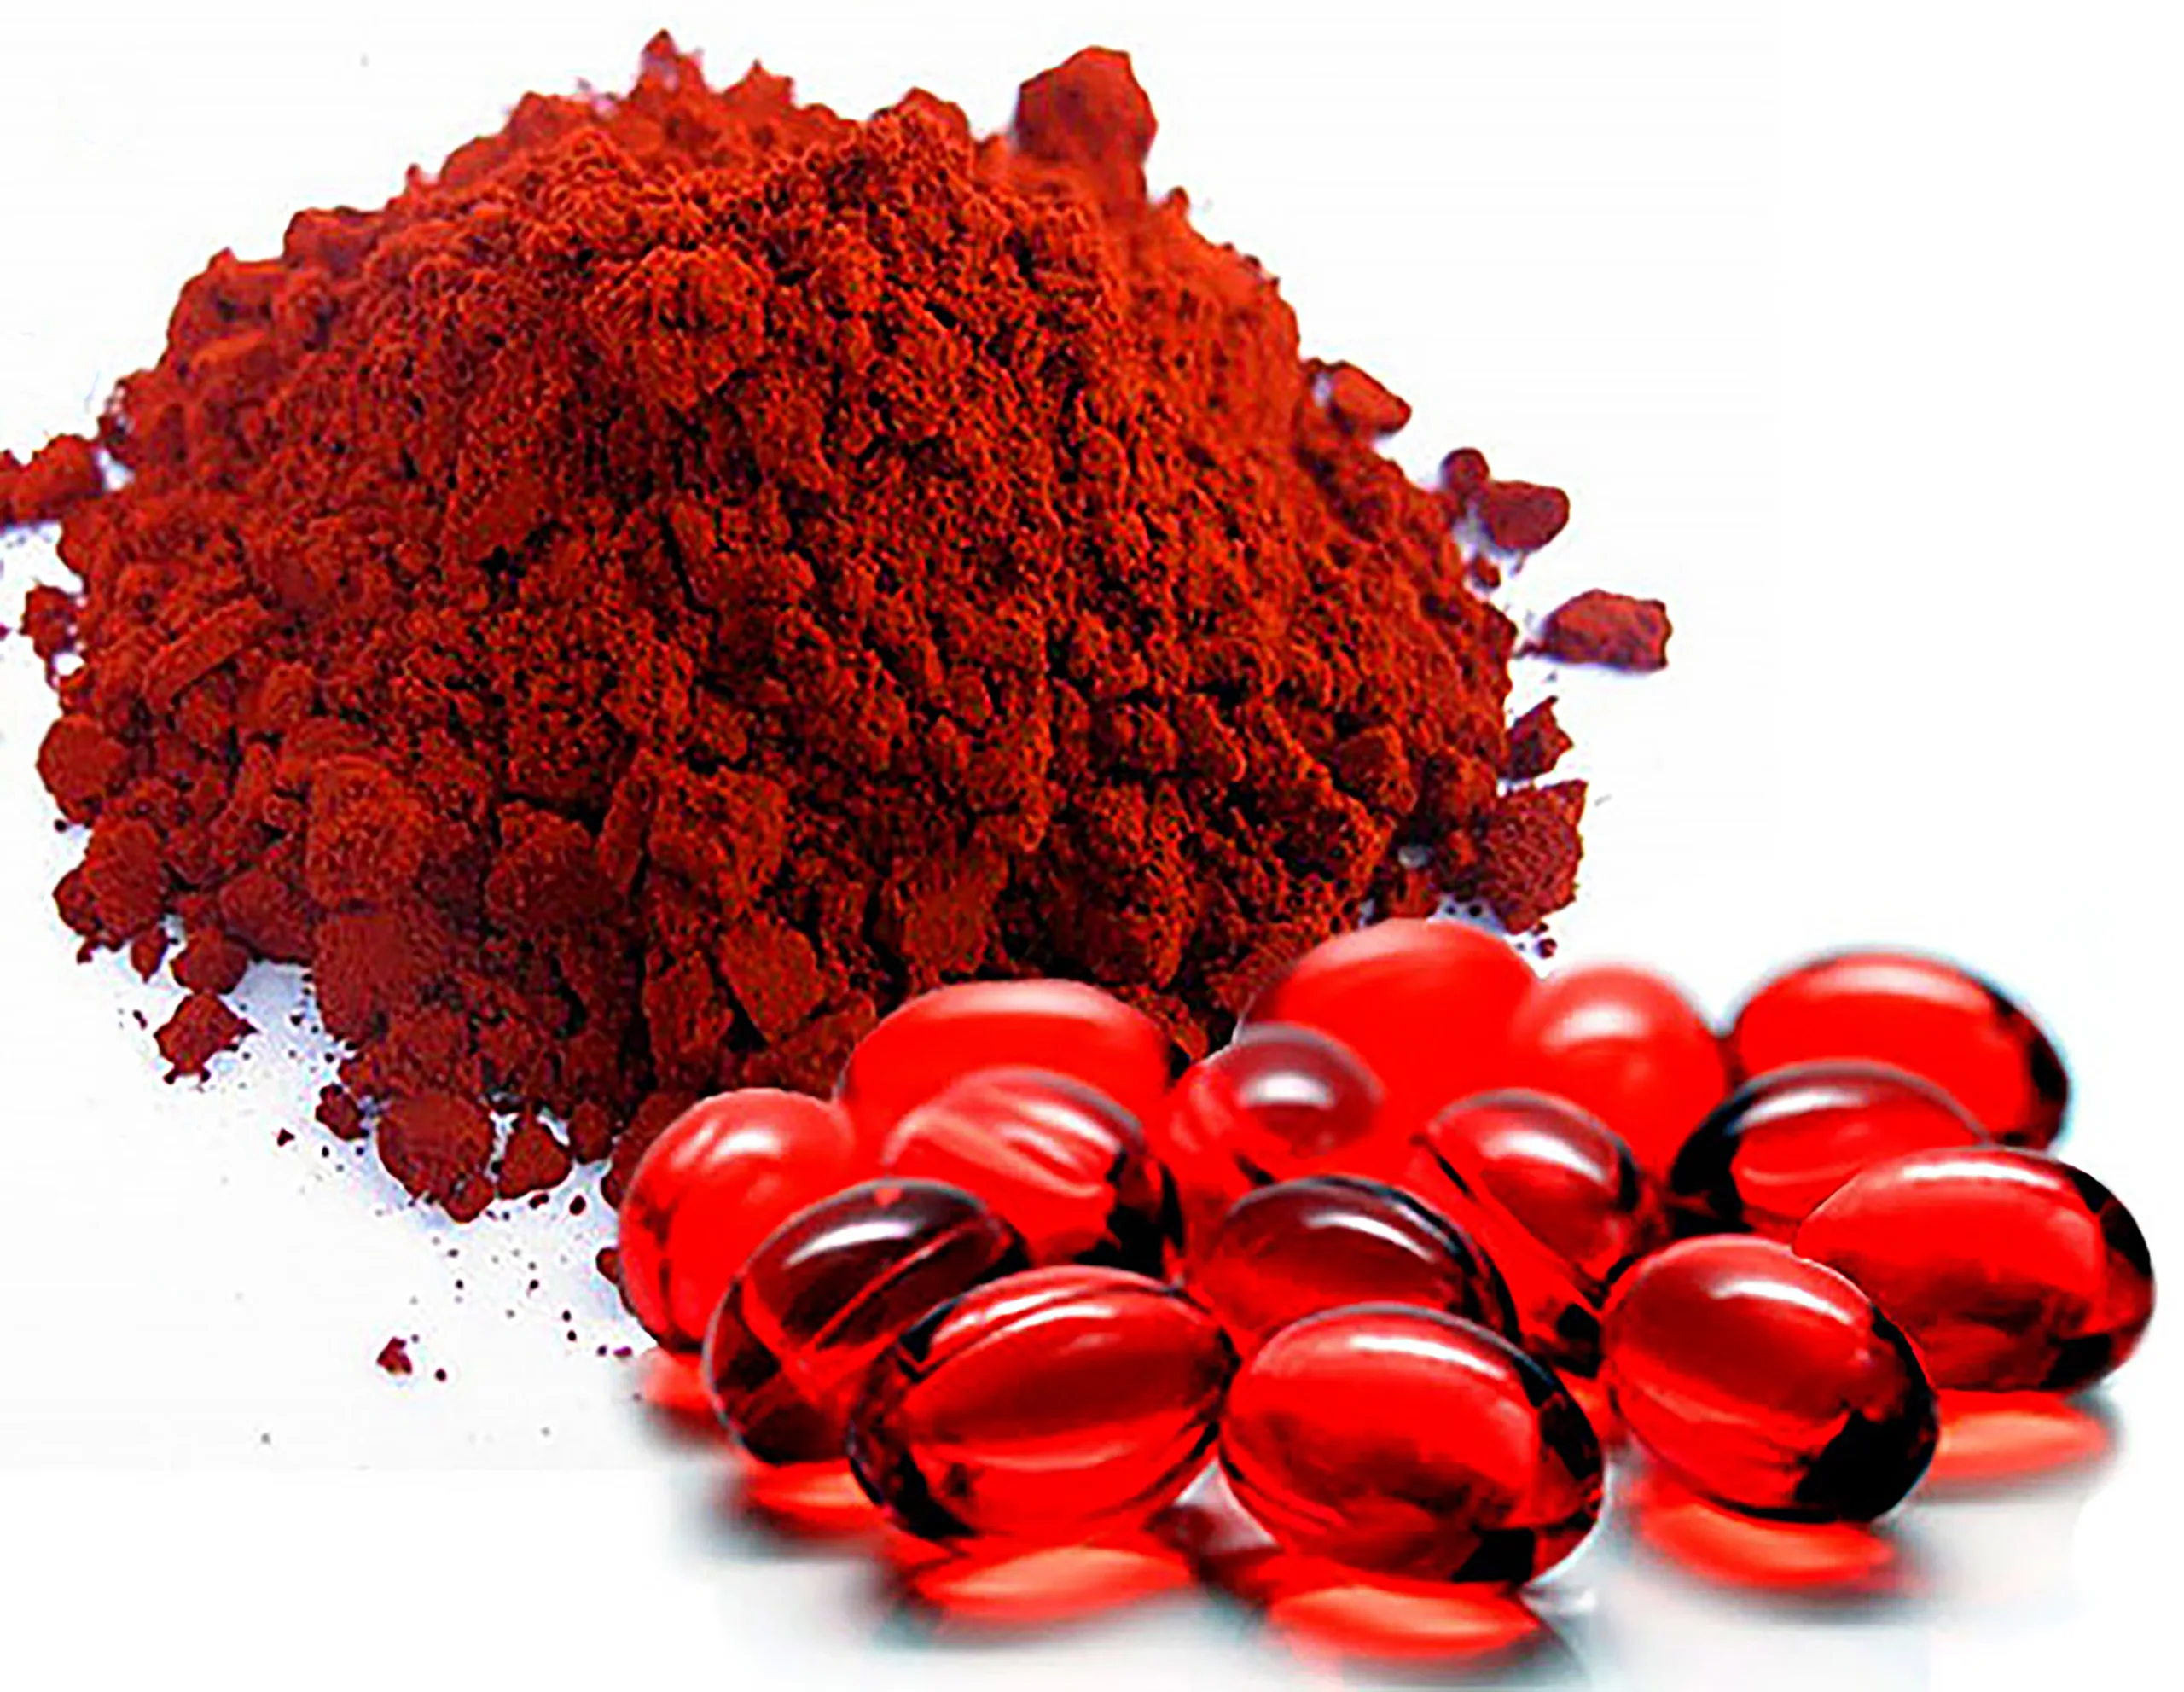 A pile of red capsules rich in astaxanthin, offering health benefits.